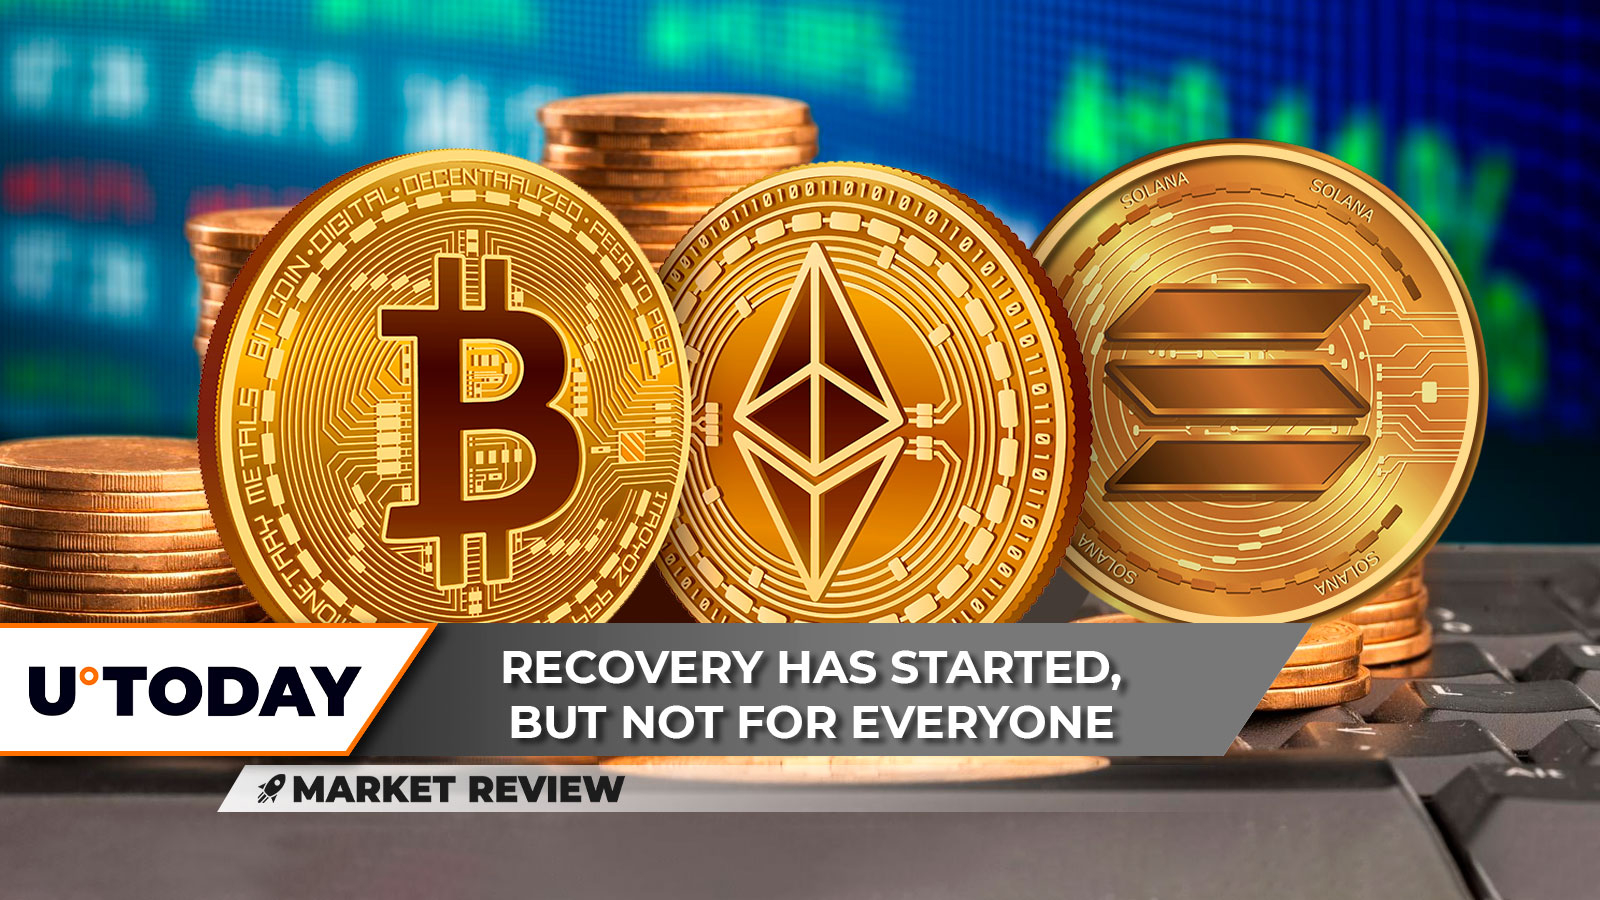 Ethereum (ETH) Loses All of Its Gains, Bitcoin (BTC) Not Ready to Give up ,000, Solana (SOL) Comeback Starts